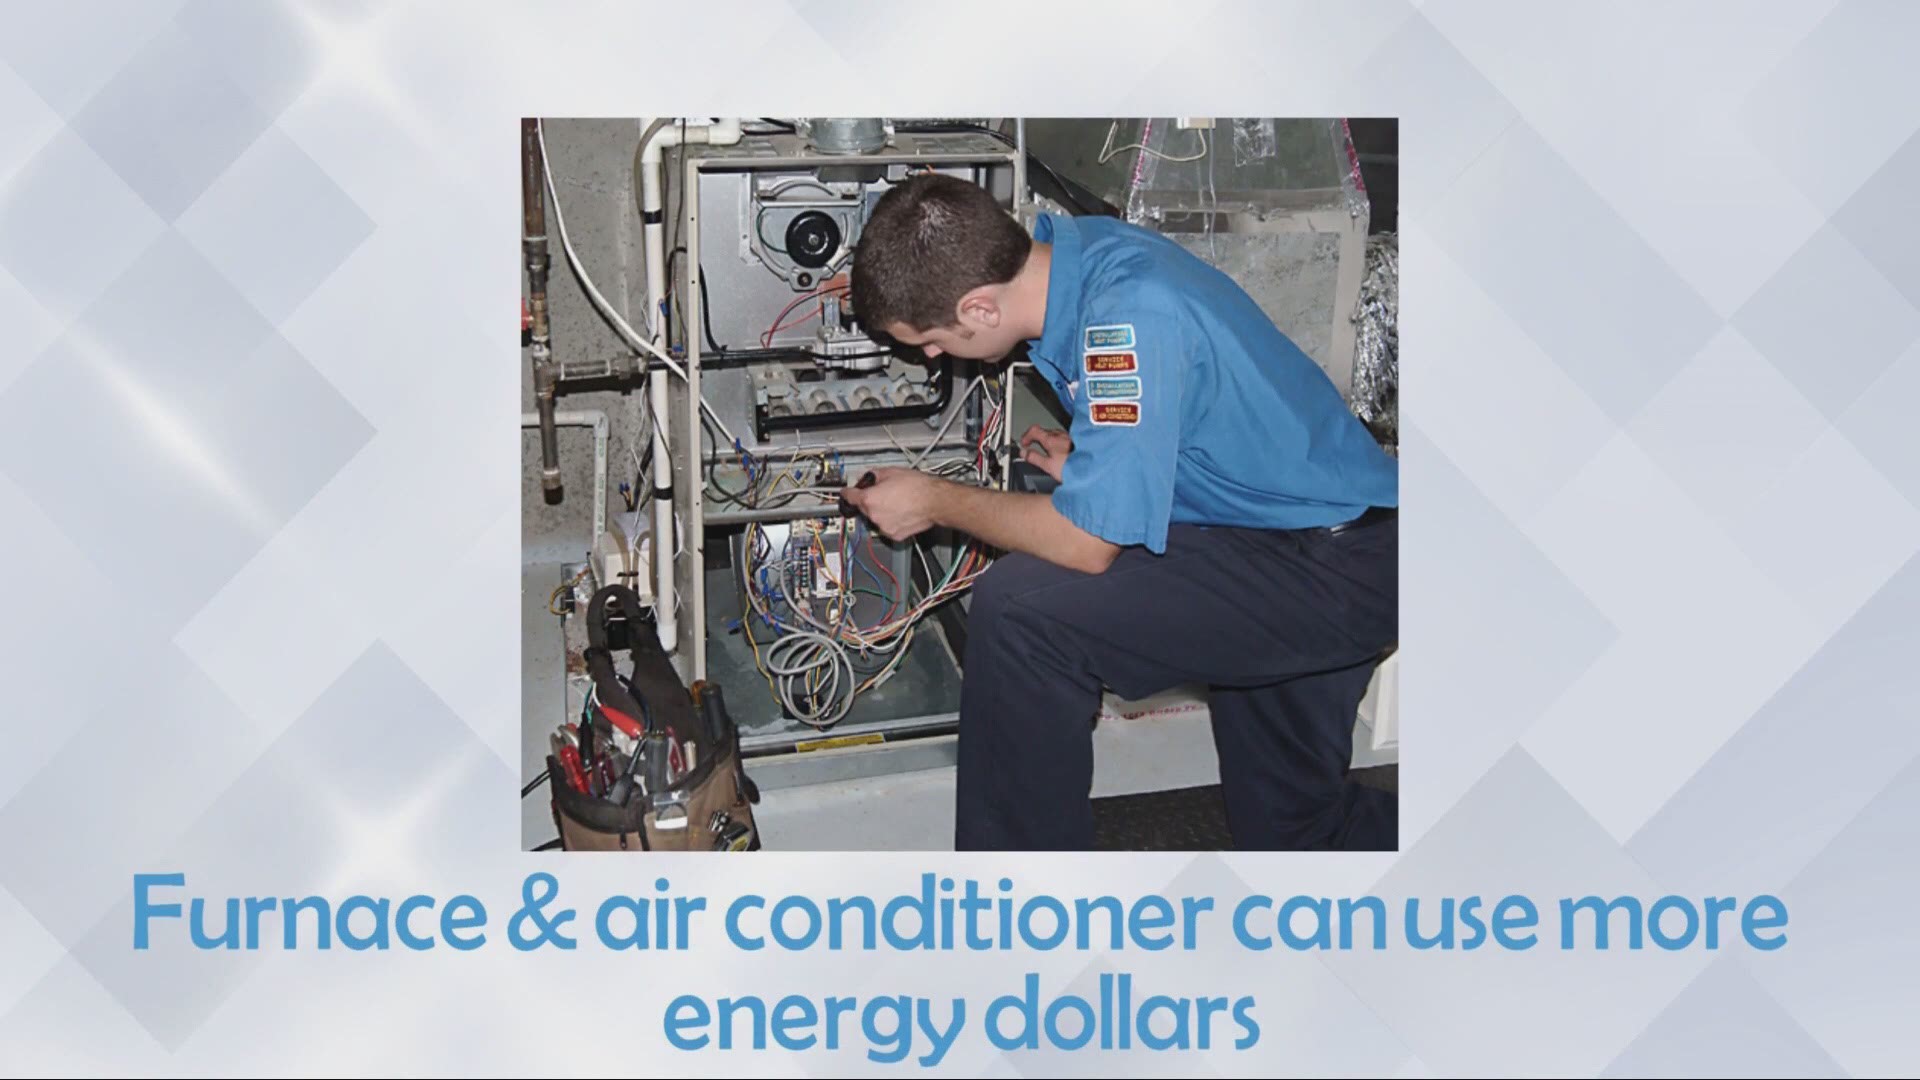 Expert advice on your home's heating and cooling systems. This segment was paid for by Big Mountain Heating & Air.